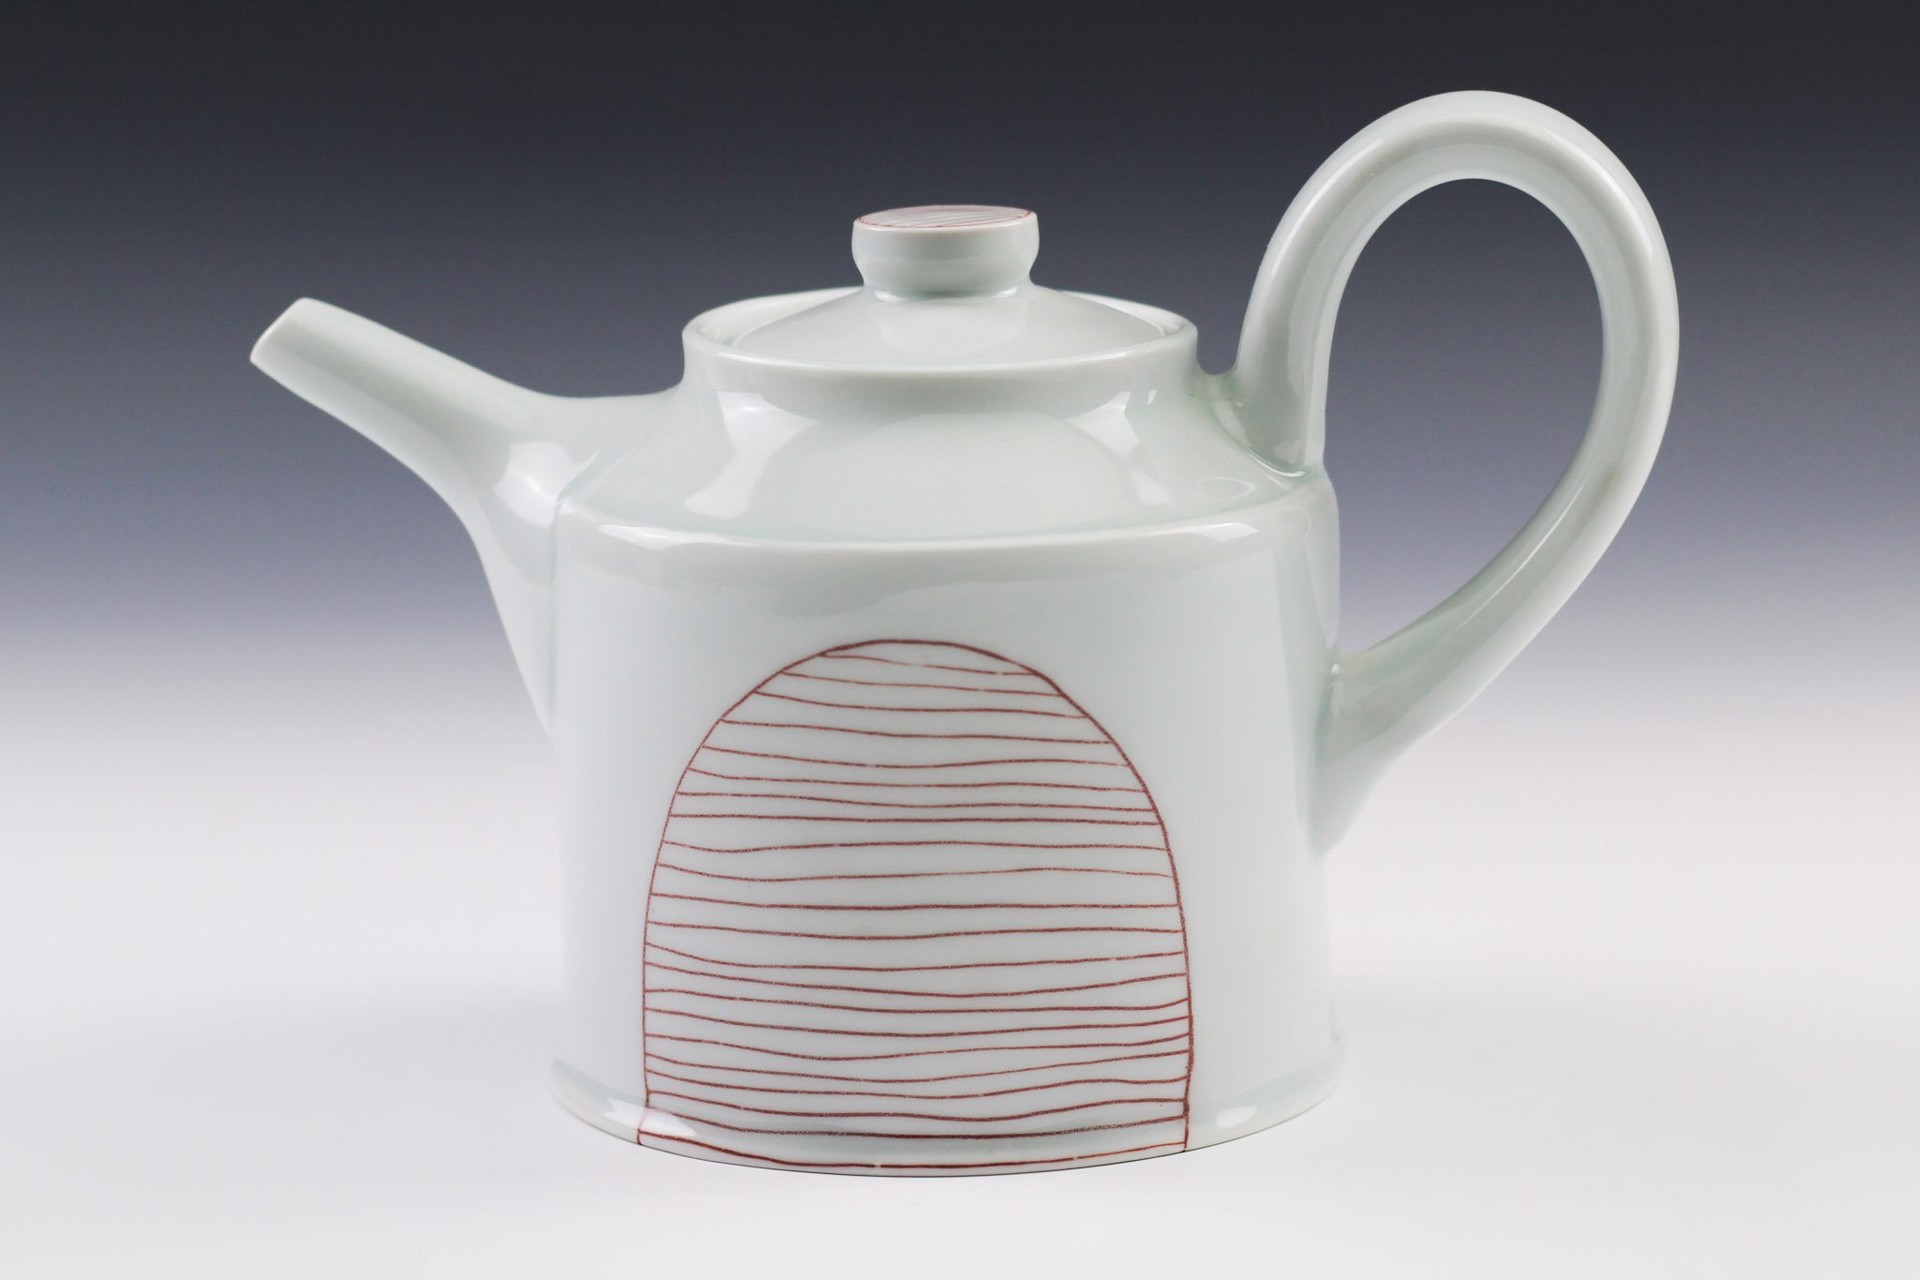 Teapot by Rob Cartelli